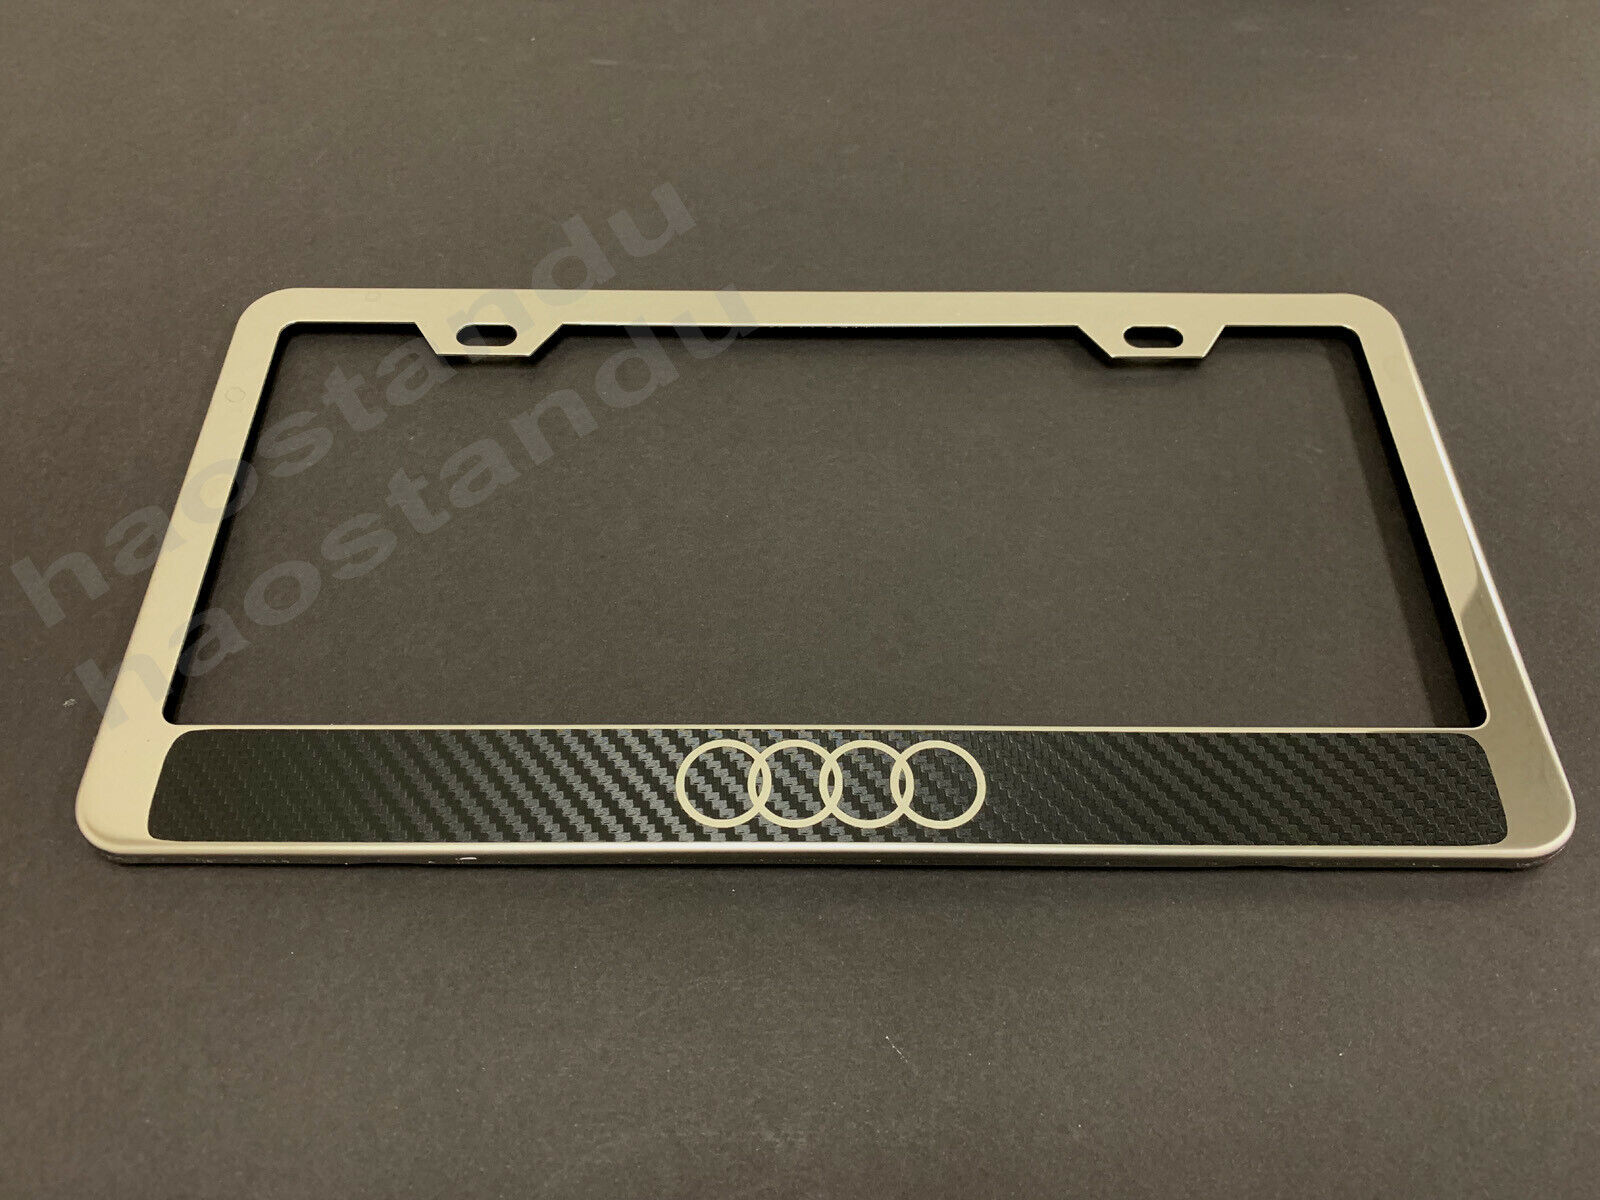 1x 4 RING AUDILOGO STAINLESS STEEL LICENSE PLATE FRAME w/Carbon Fiber Style